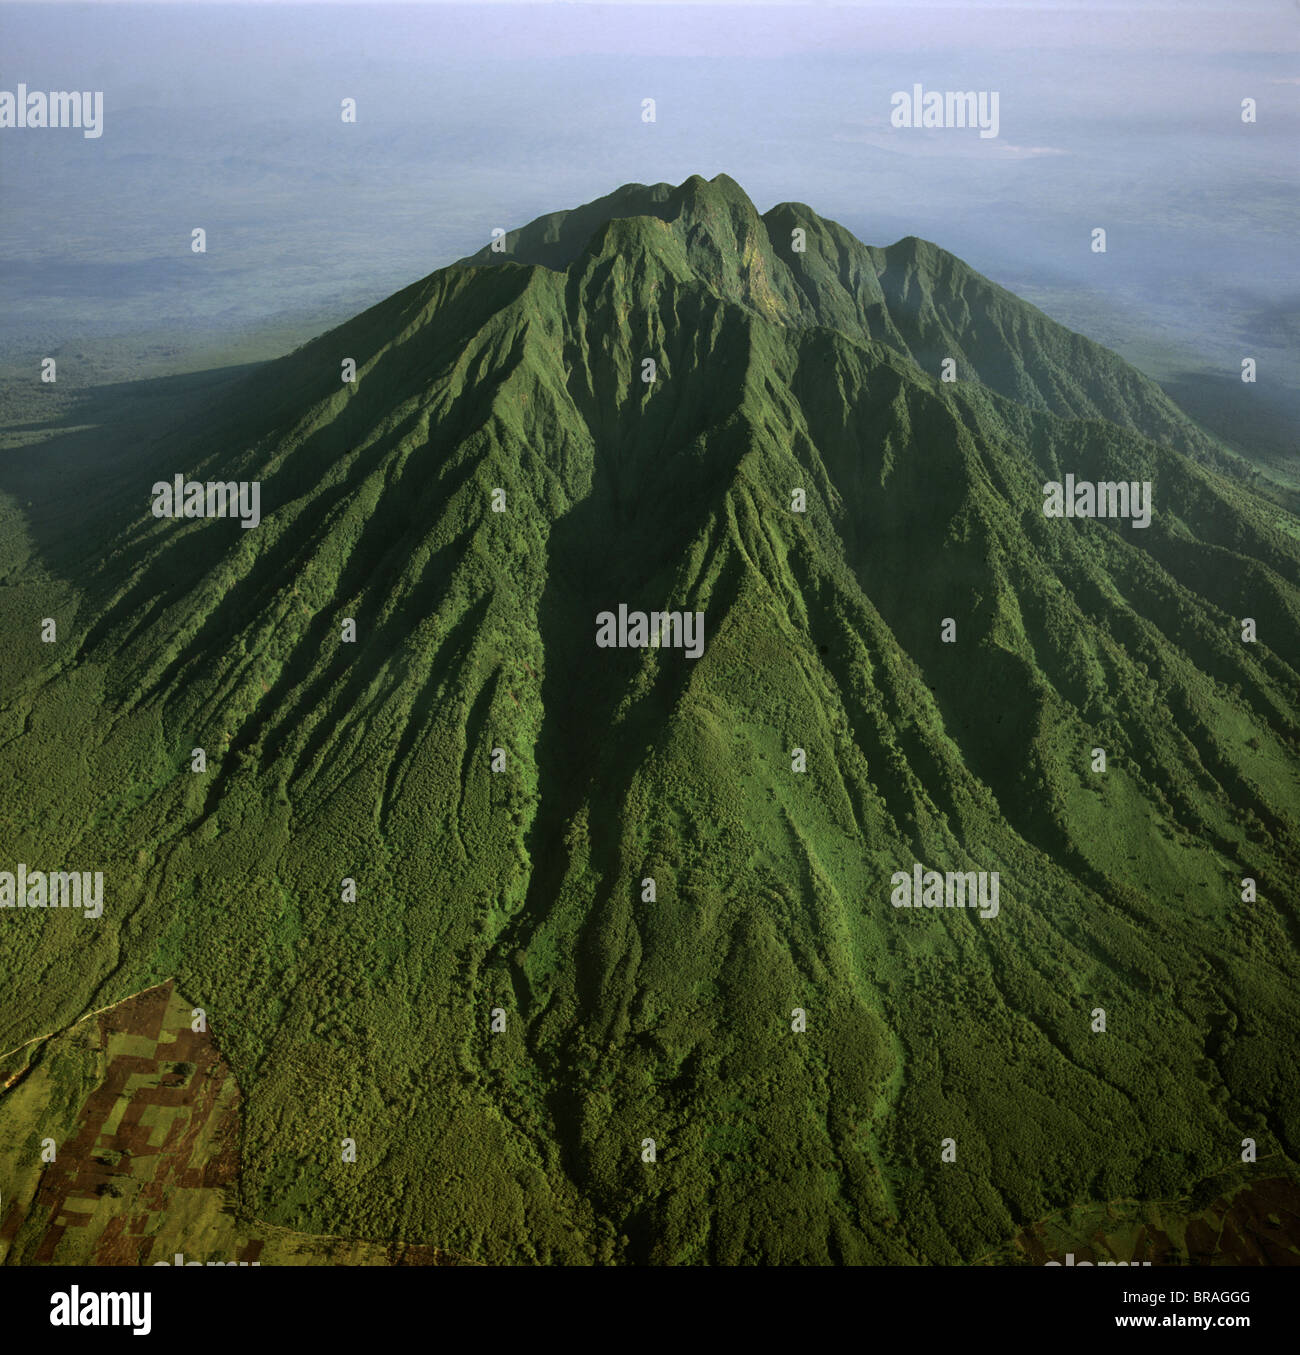 Aerial view of Mount Sabyinyo, an extinct volcano and oldest of the Virunga Mountains, the summit at 3645ï Stock Photo